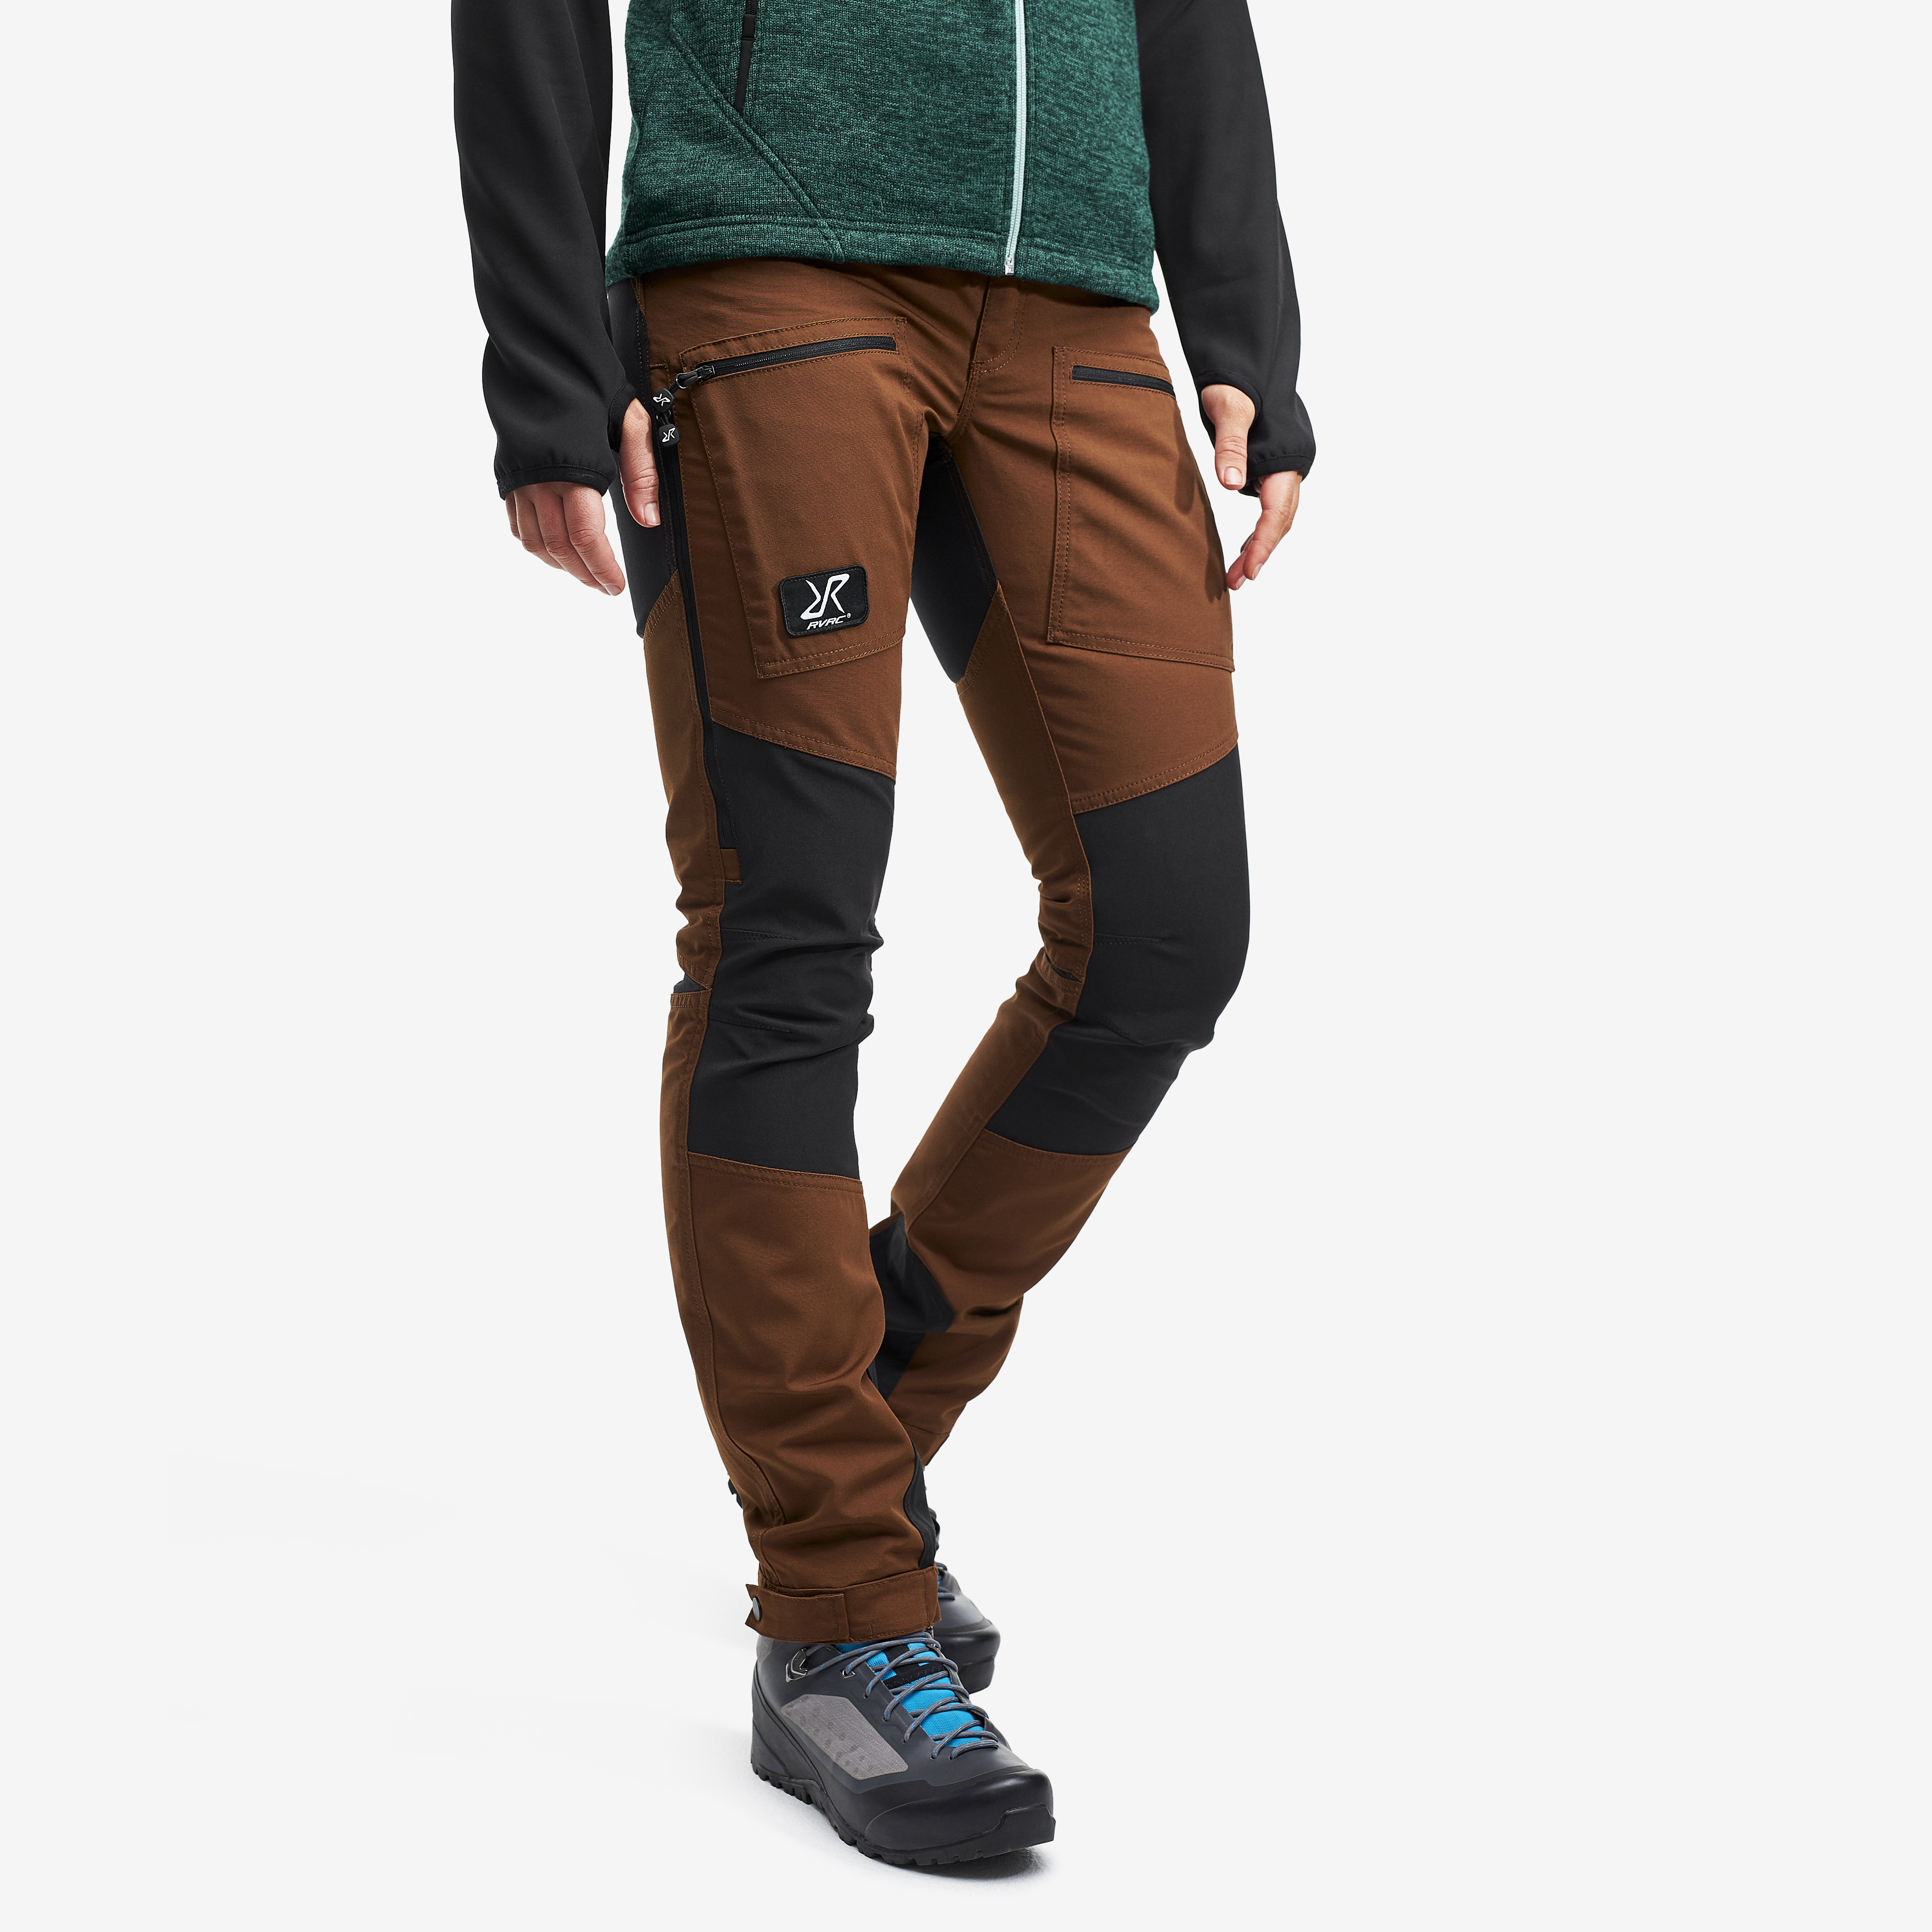 Nordwand Pro Pants Espresso Brown Mujeres